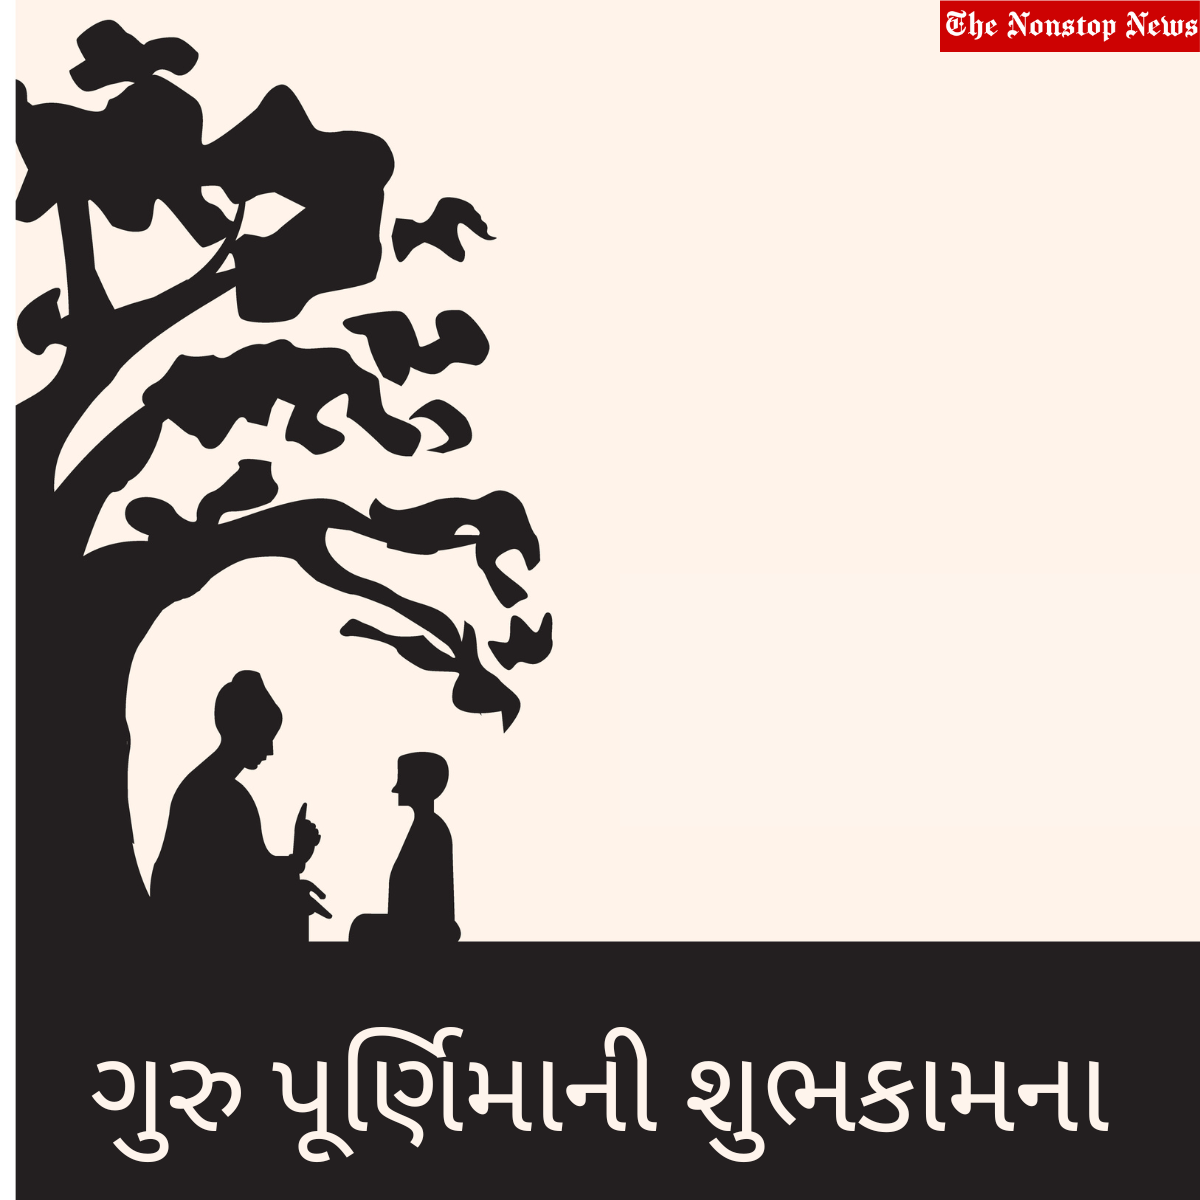 Happy Guru Purnima 2022: Gujarati Quotes, Wishes, Messages, Images, Greetings, Shayari, Posters, To Share